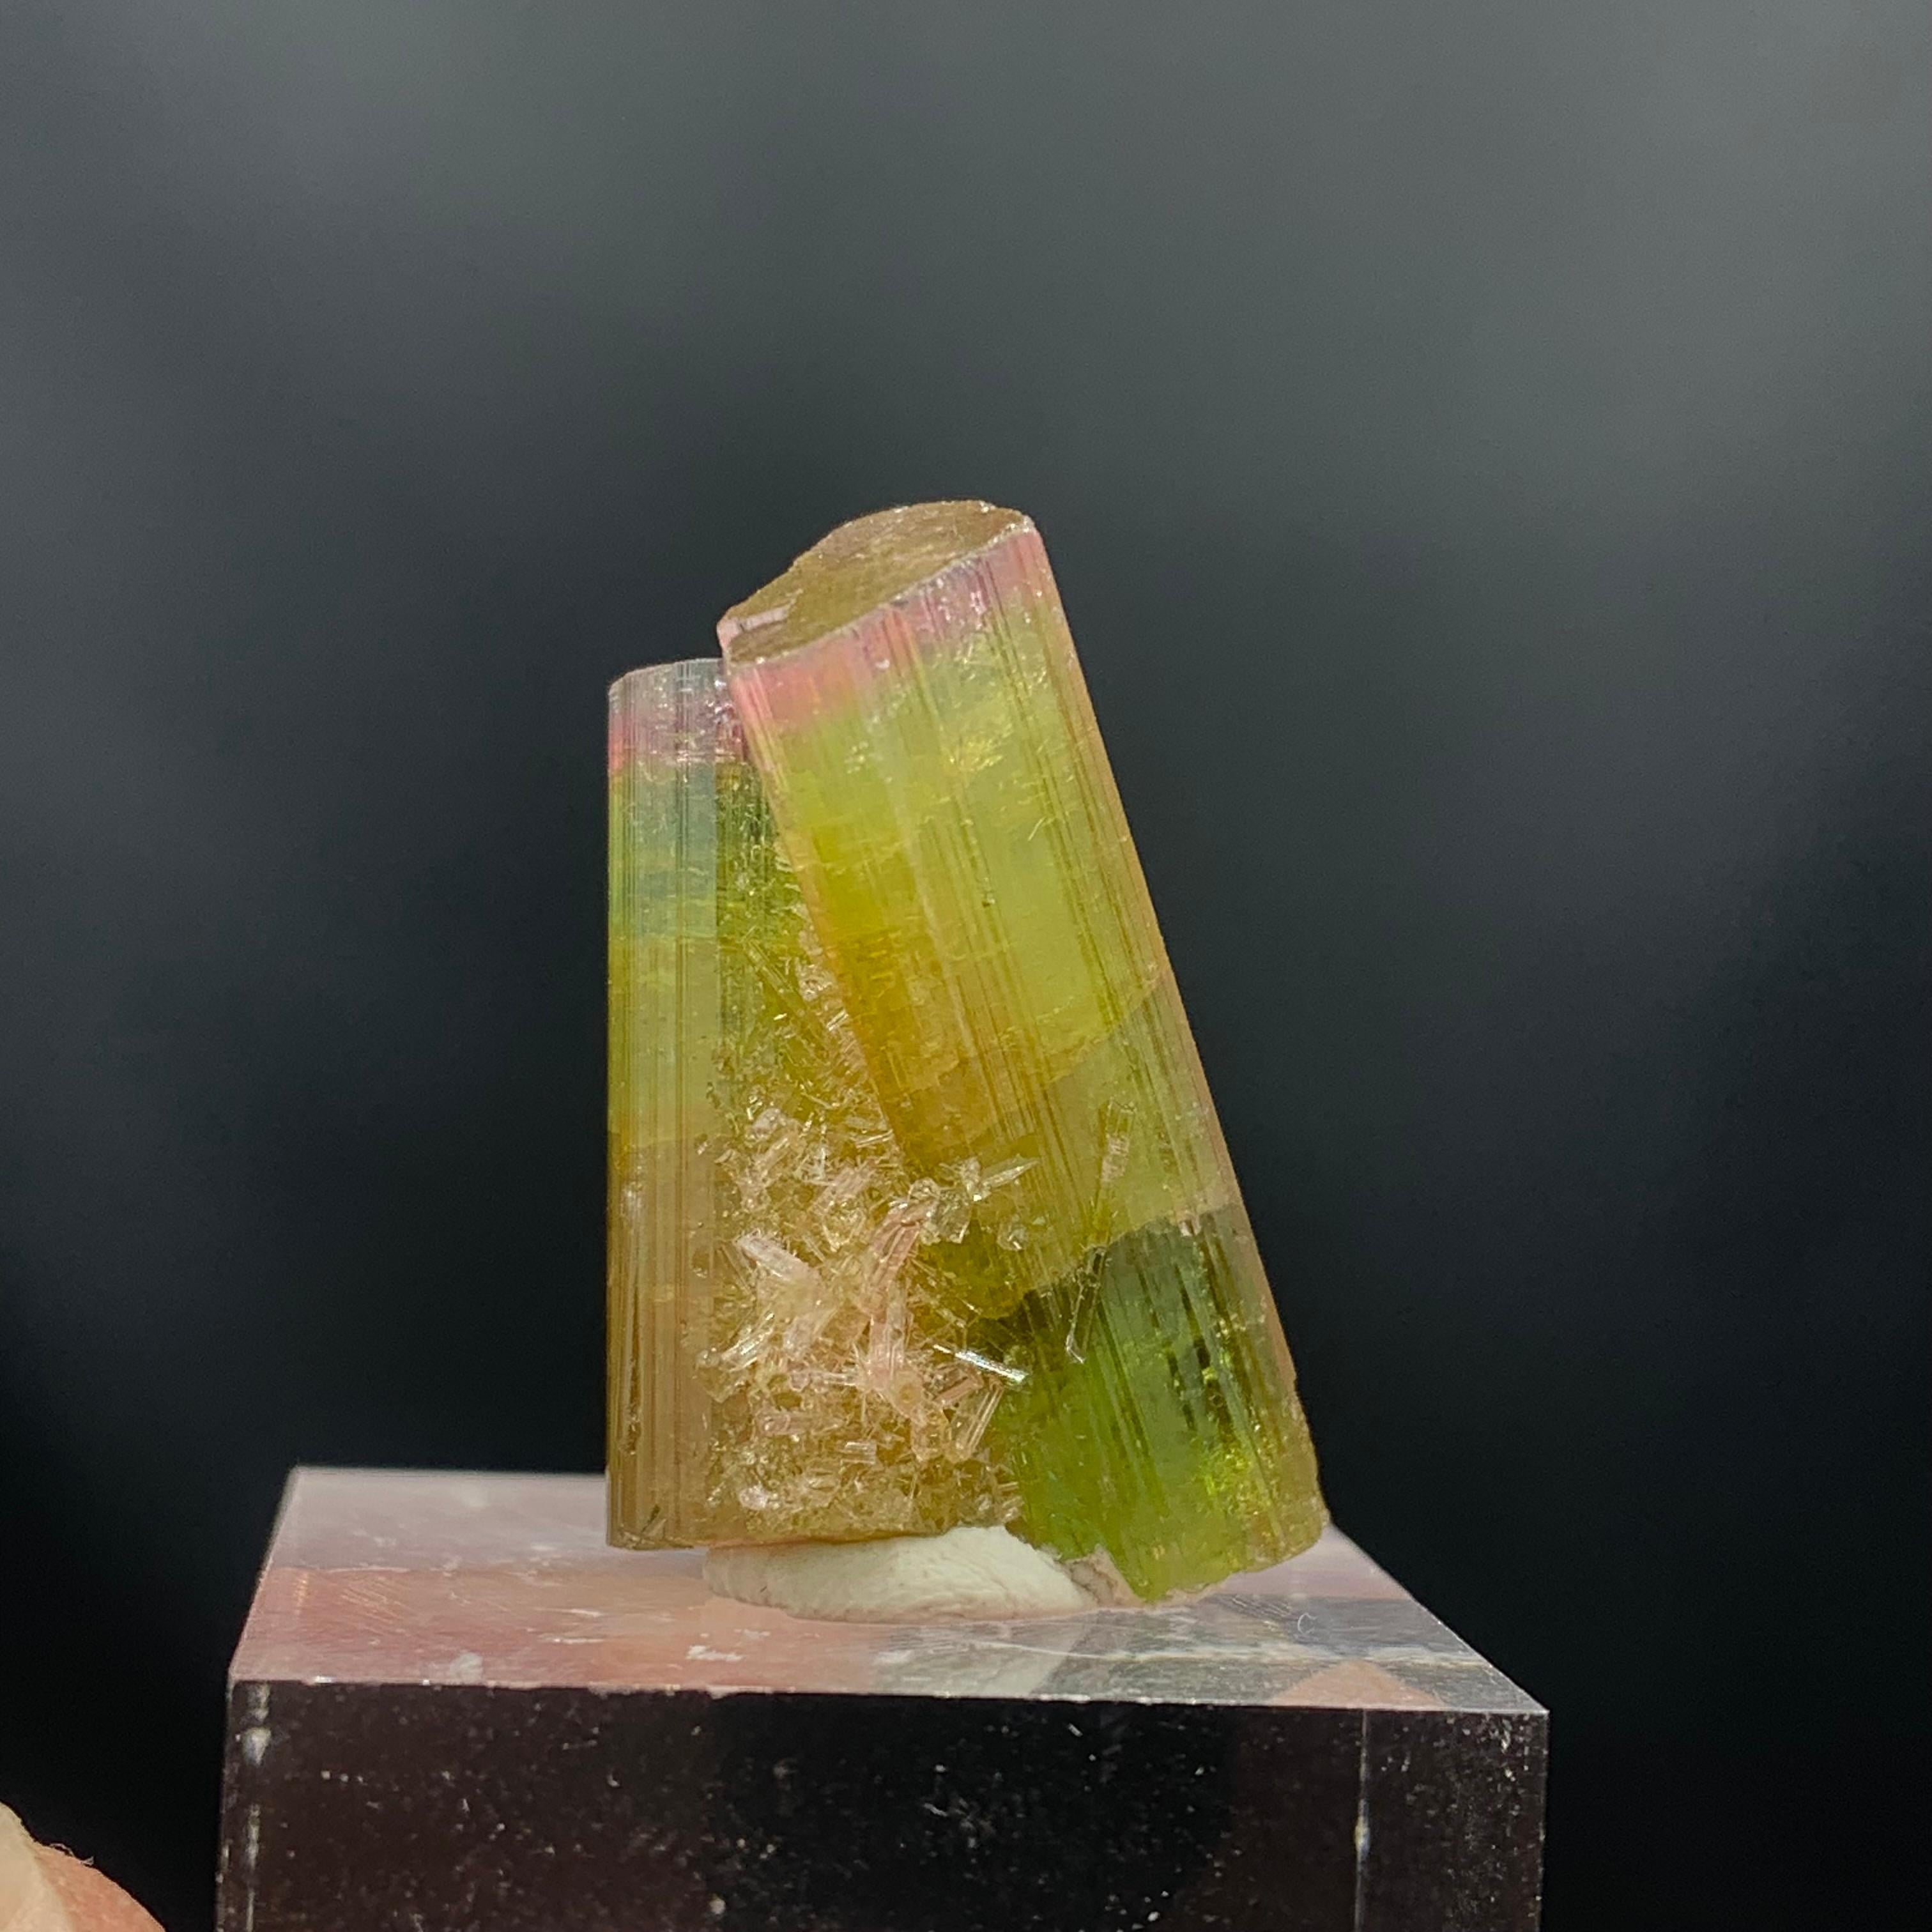 Glamorous 46.05 Carat Tri Color Combined Tourmaline Specimen from Afghanistan  For Sale 4